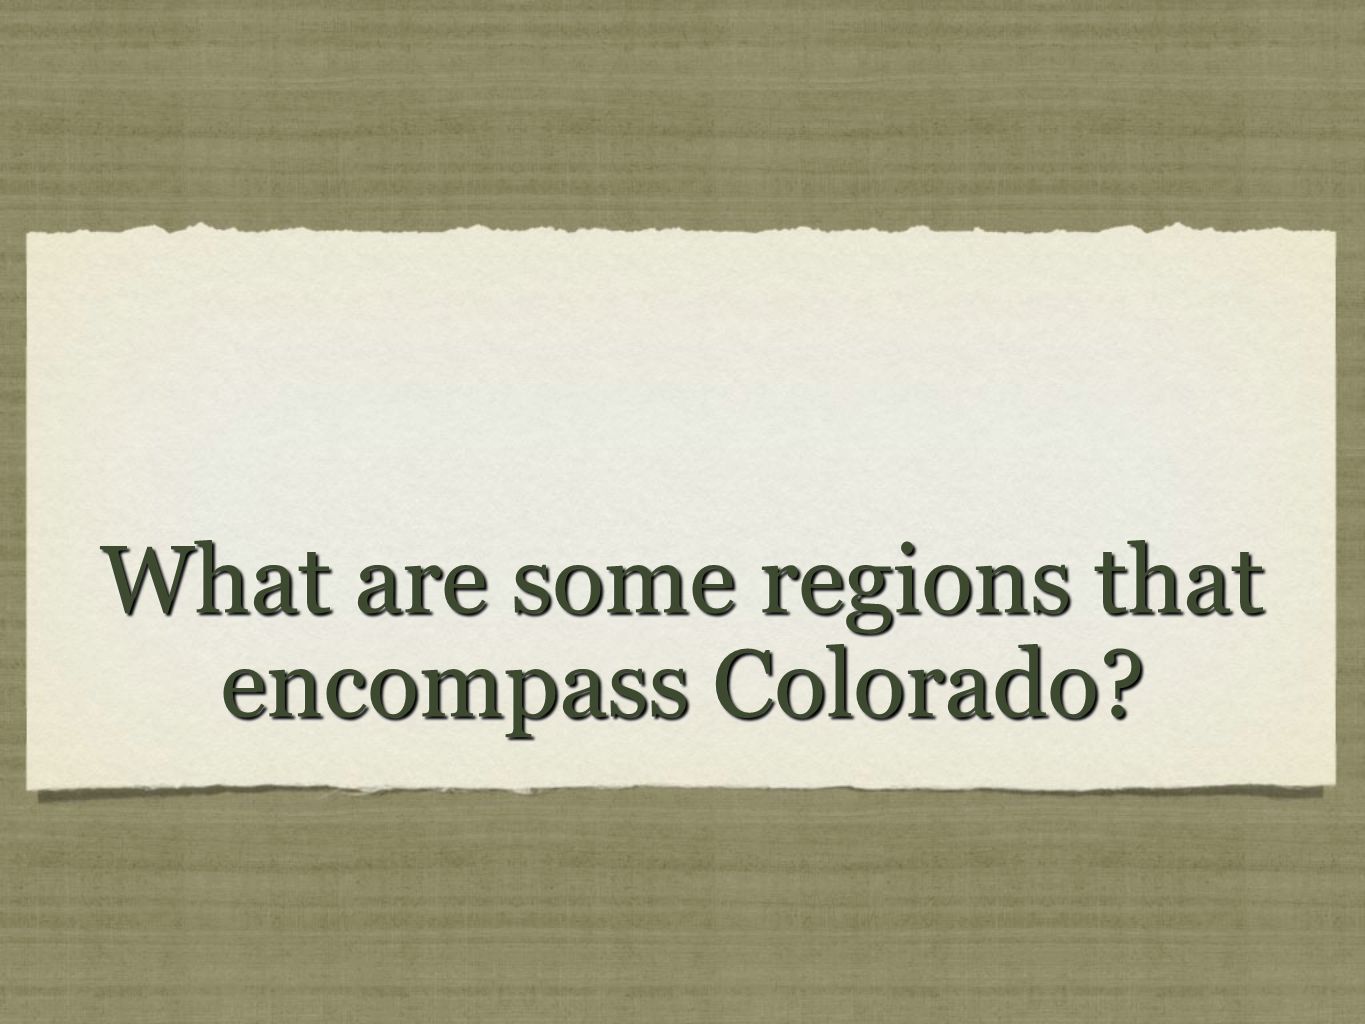 What are some regions that encompass Colorado